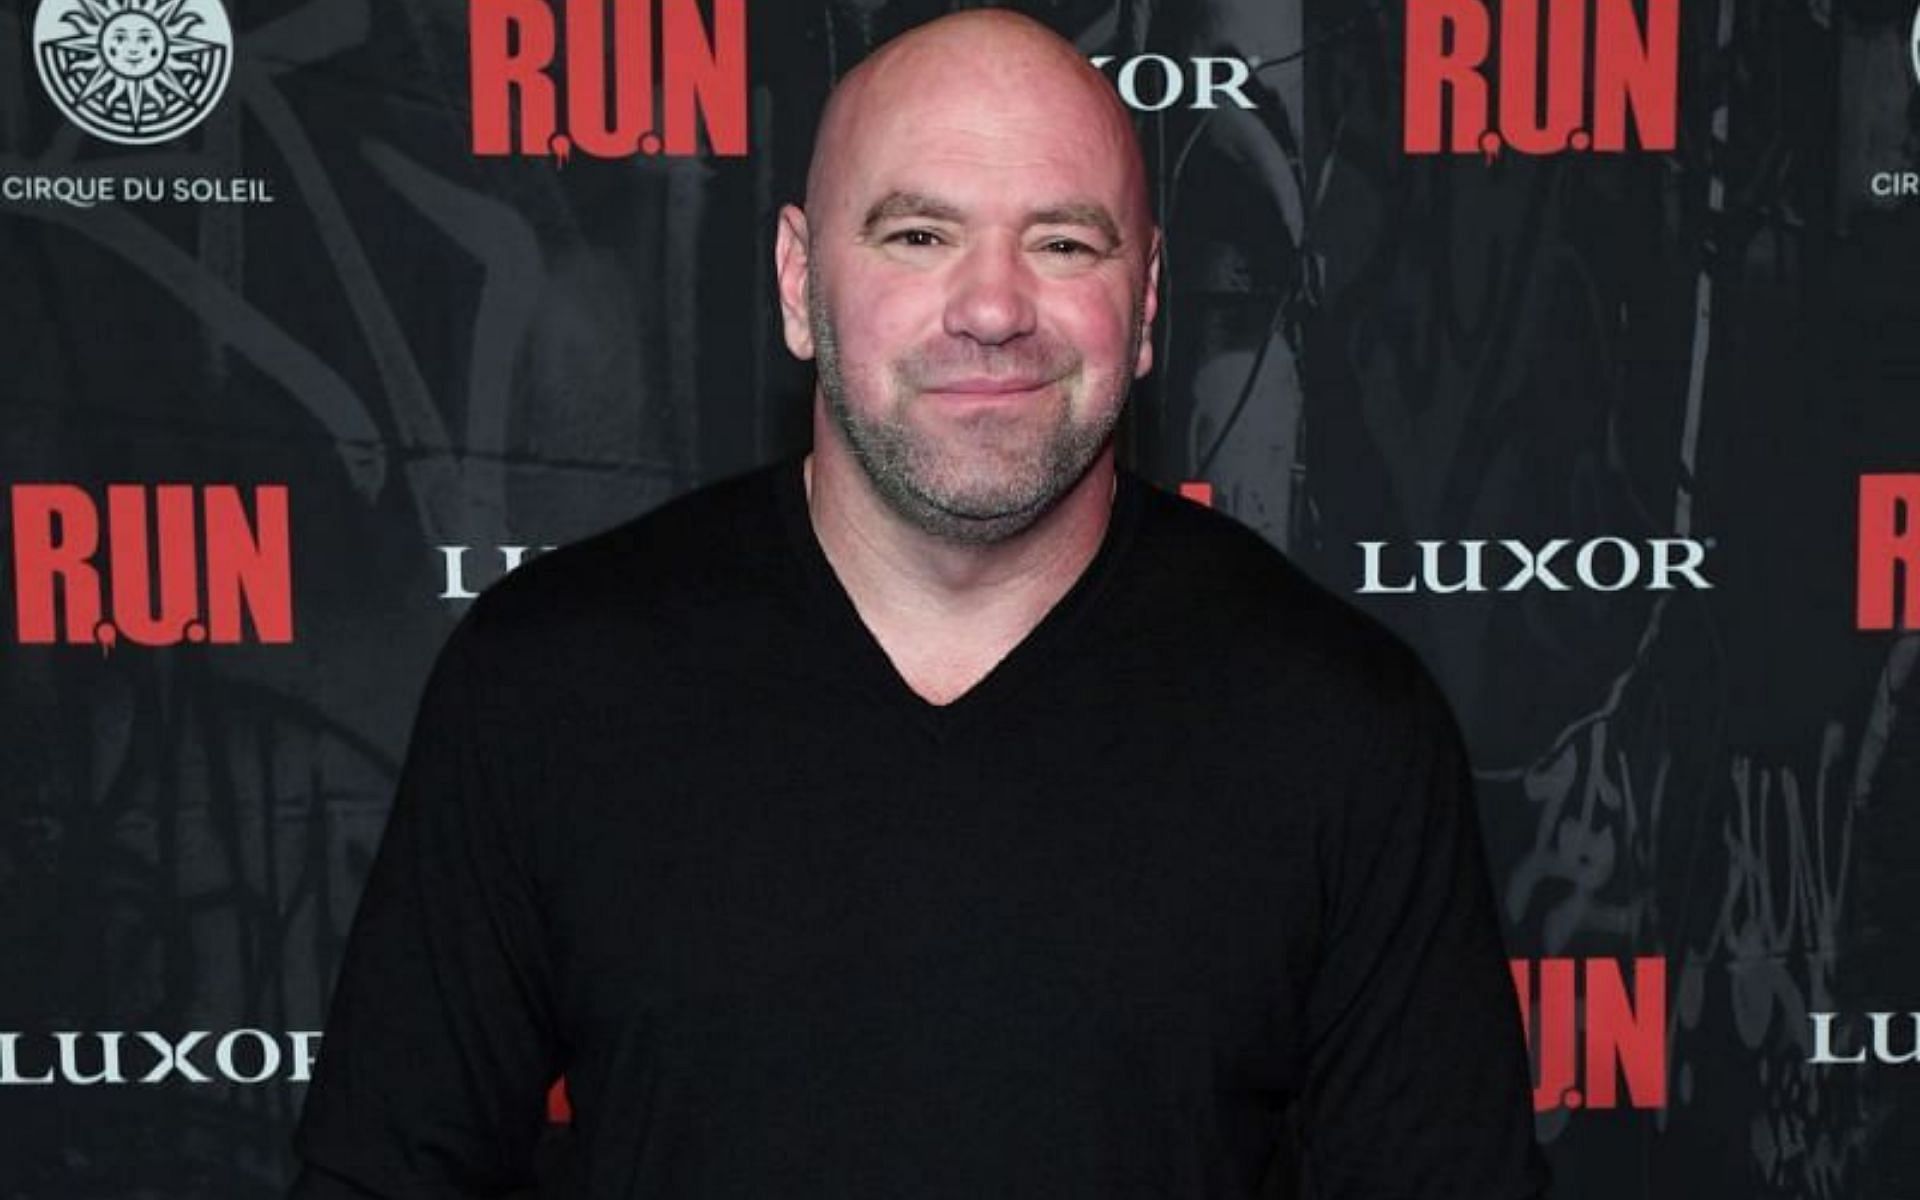 UFC president Dana White slammed other MMA promotions for trying to sign released UFC fighters.